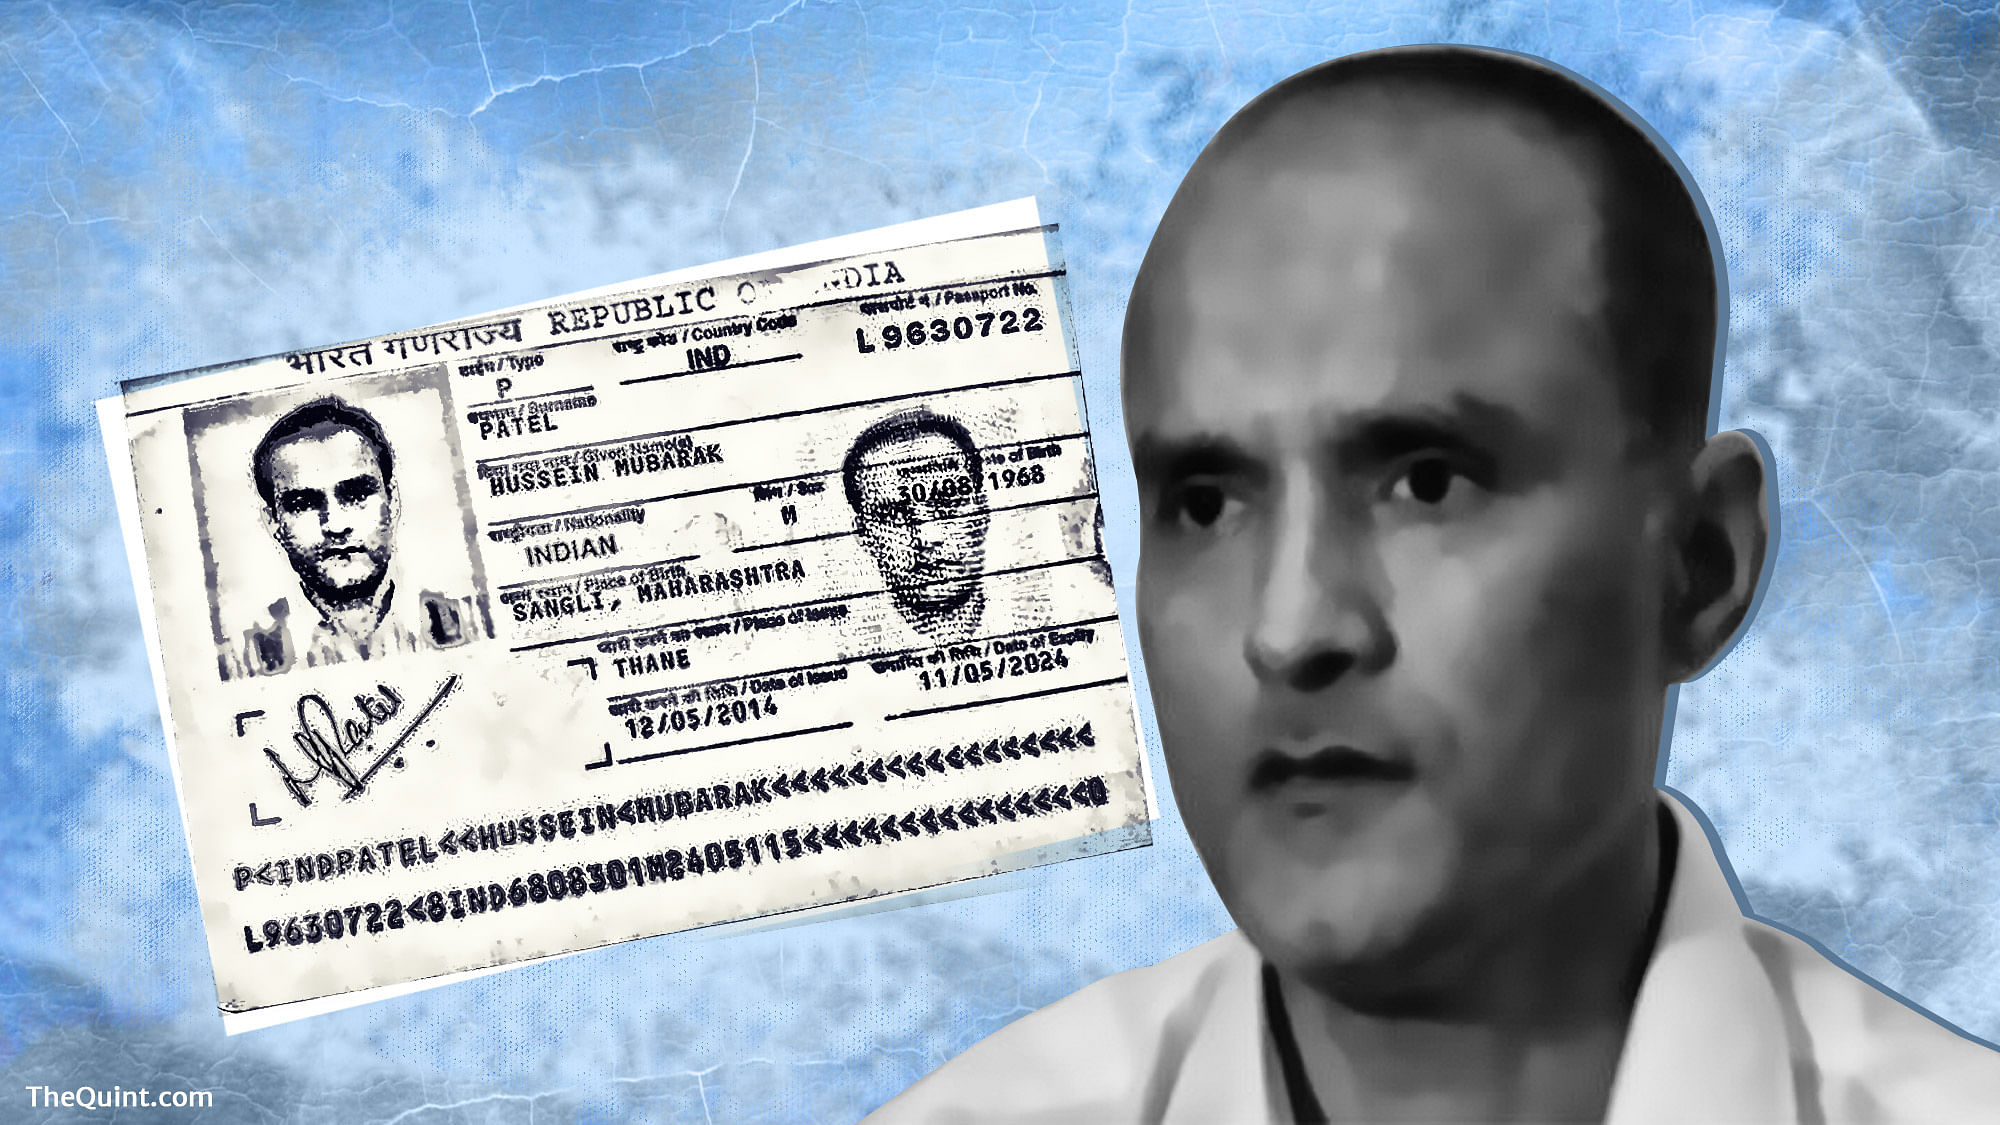 Kulbhushan Jadhav, who Islamabad claims is an Indian spy, was handed the death sentence by a Pakistani military court. (Photo: <b>The Quint</b>)